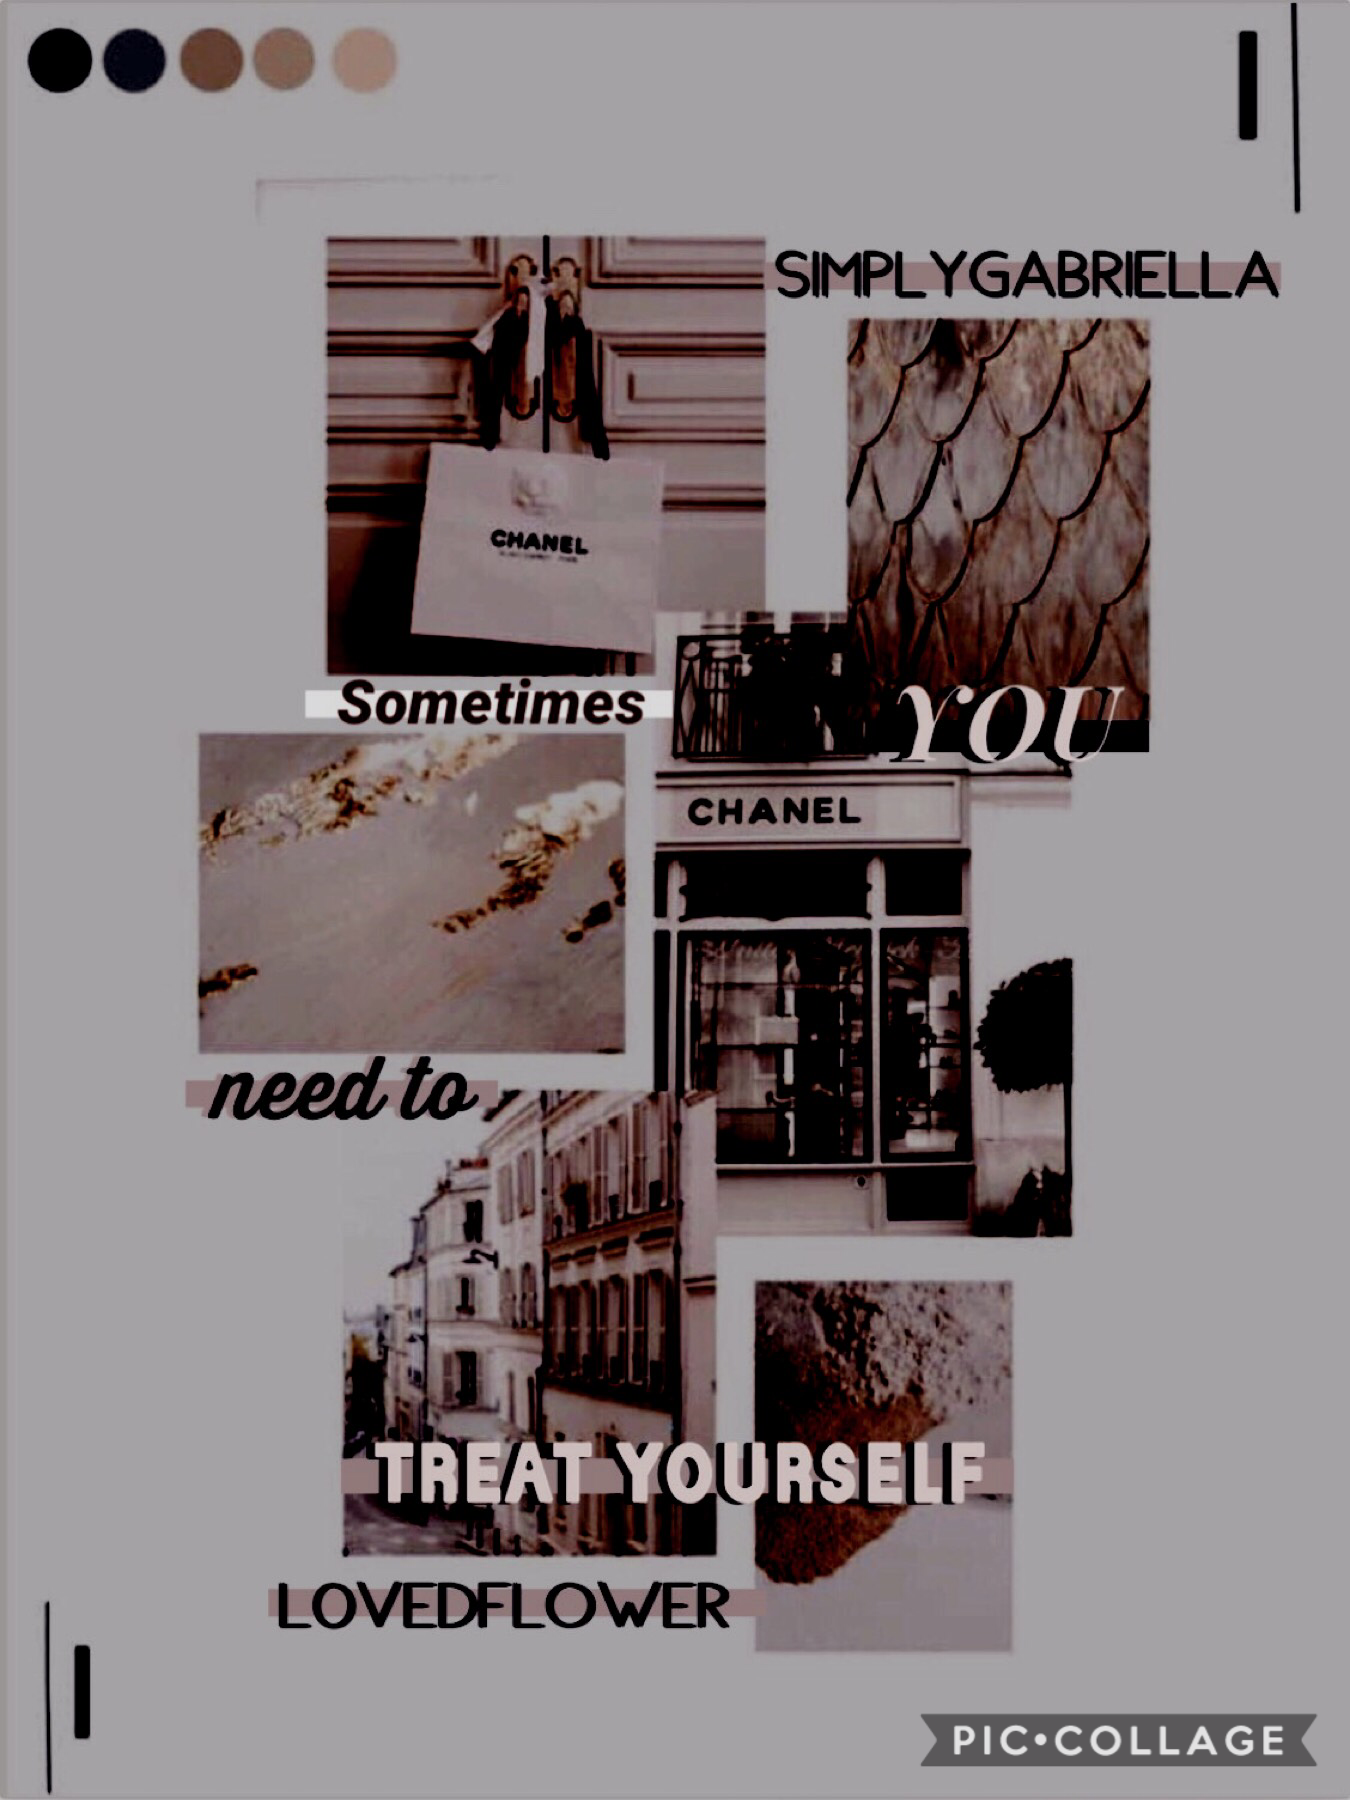 [ click ]
Collab with Gabriella⚡️ @ SimplyGabriella
Honestly gabriii deserves a lot of recognition for her work. She’s amazing!!!🖤
Please check out her account and make sure you follow herr! 
She did the amazing background and I did the text!💫